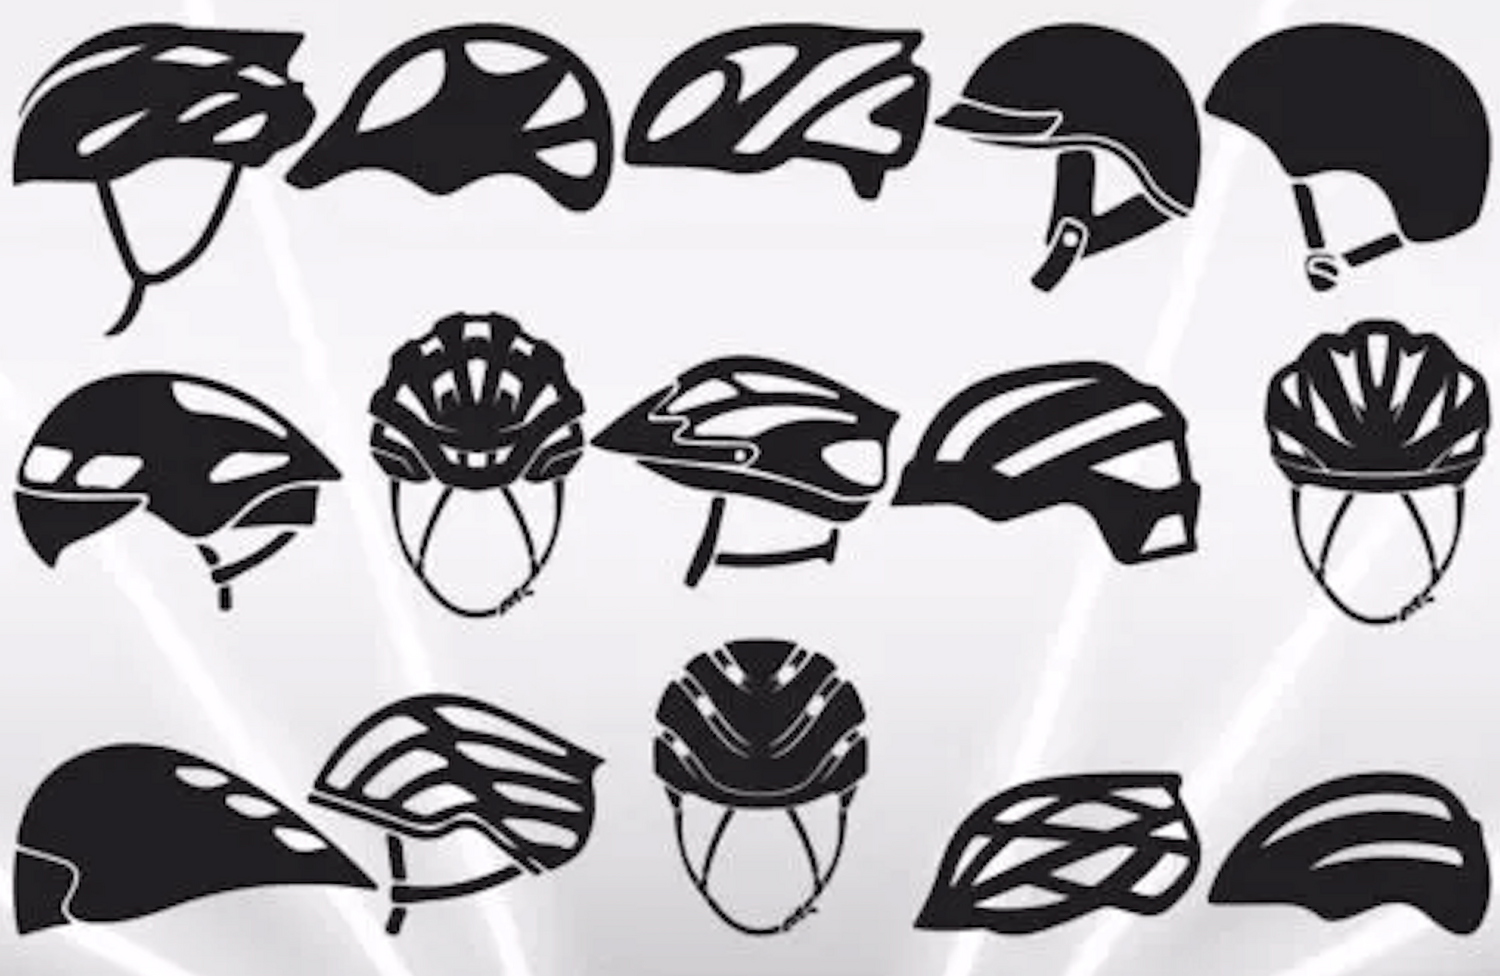 Helmets (Safety First)